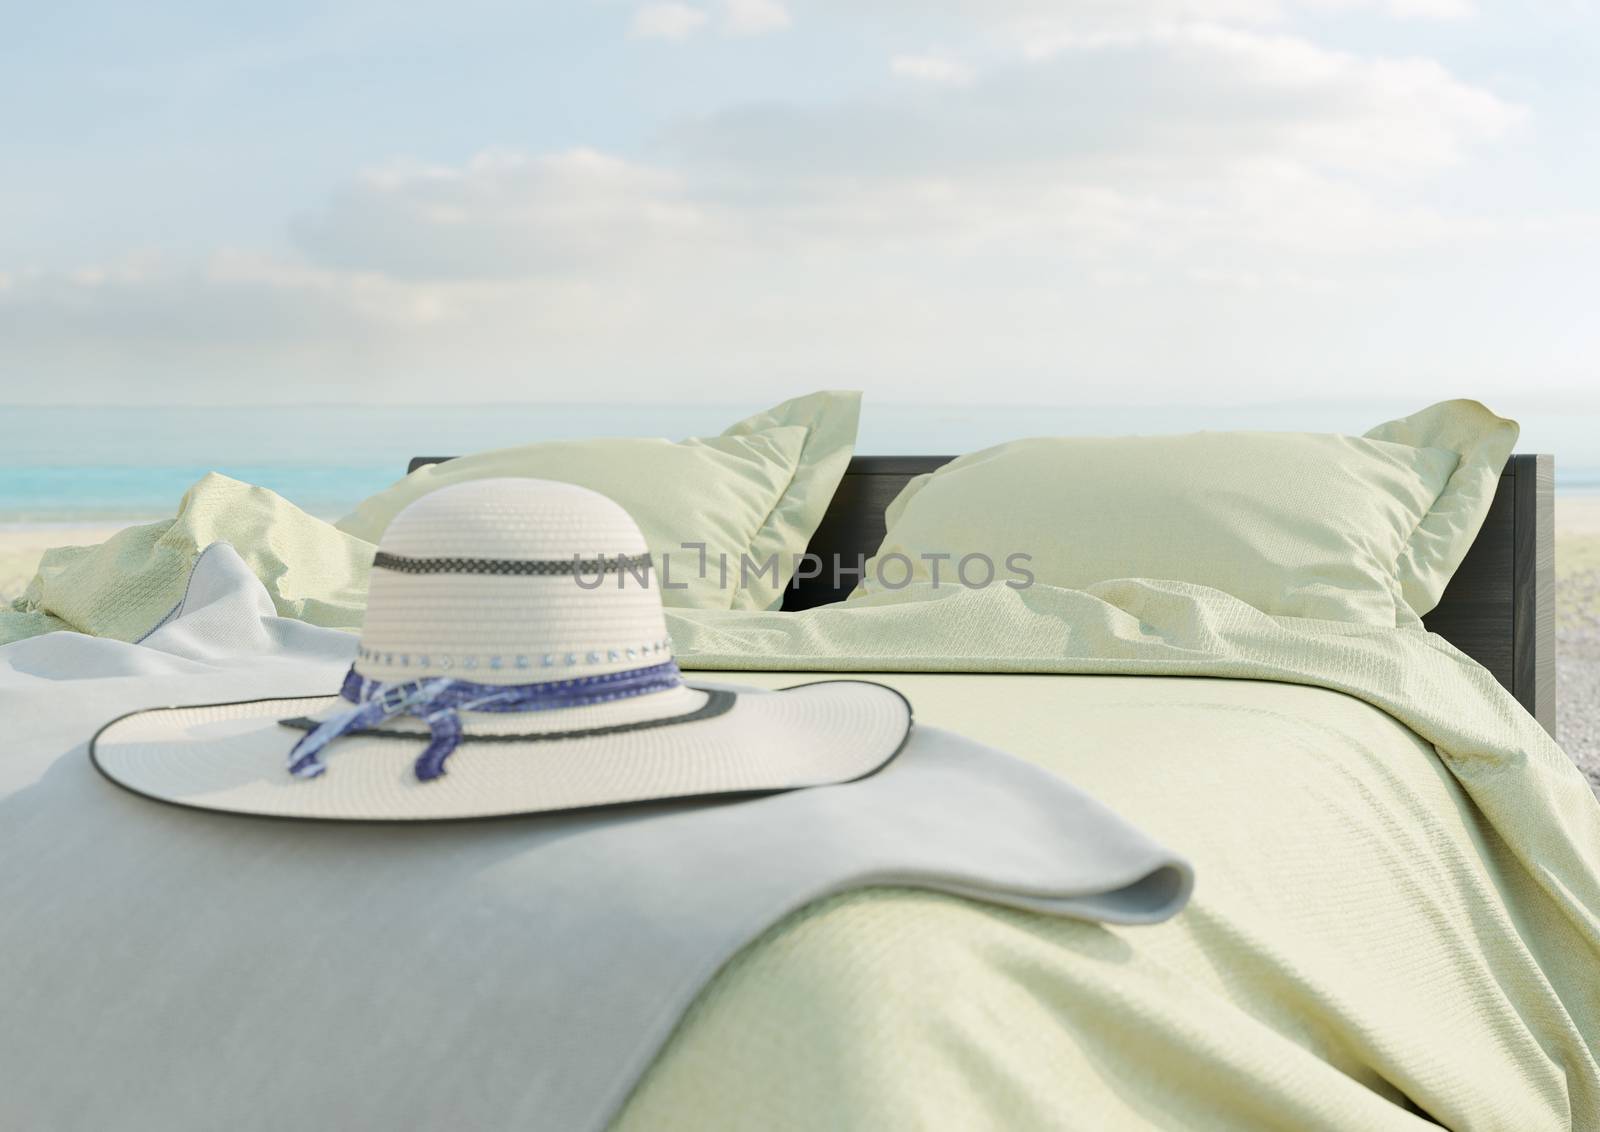 Beach lounge - bed with umbrella on Sea view for vacation and summer concept photo by denisgo